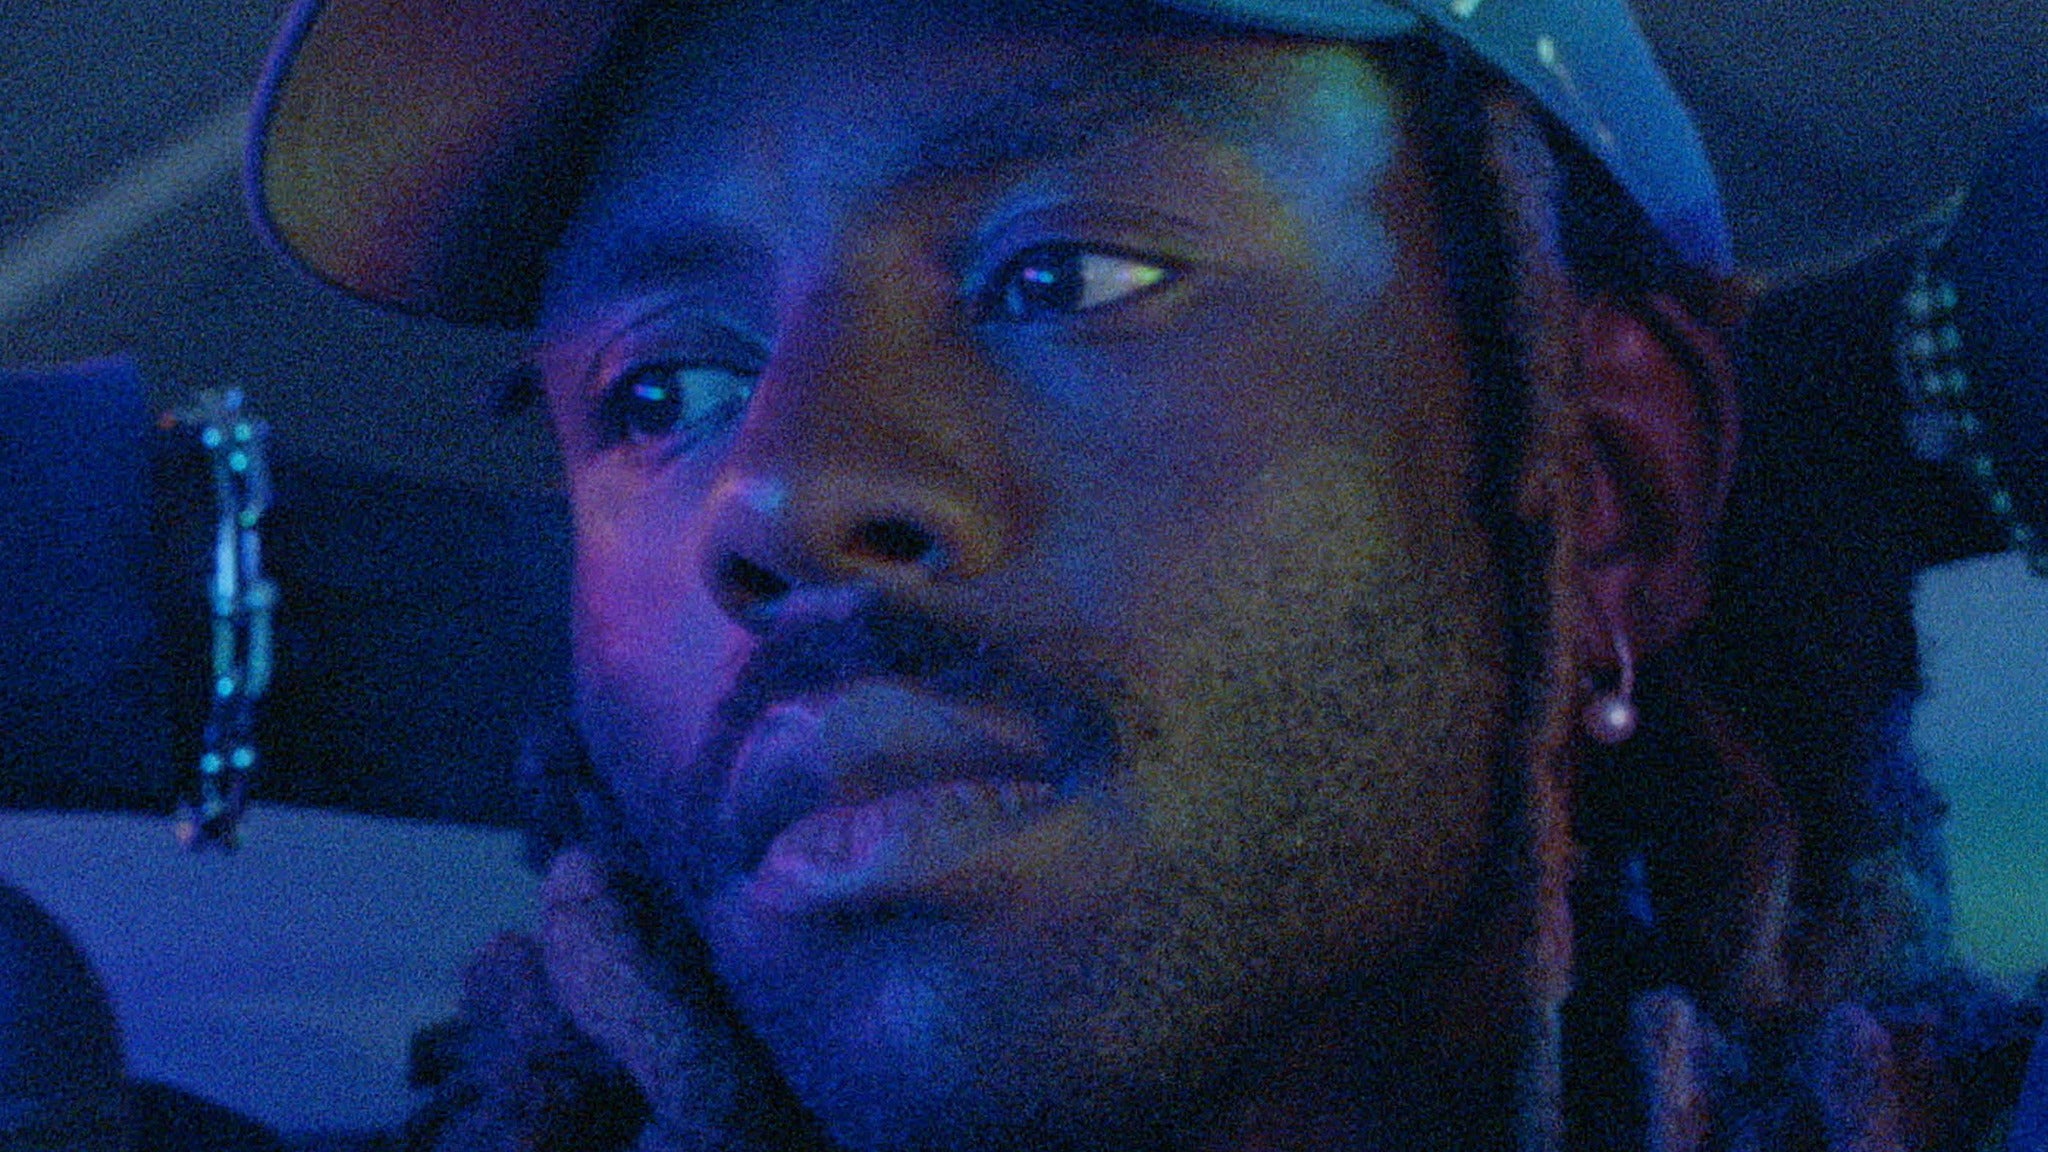 Swan House Presents: Blood Orange with Special Guest Tei Shi in New York promo photo for Official Platinum presale offer code